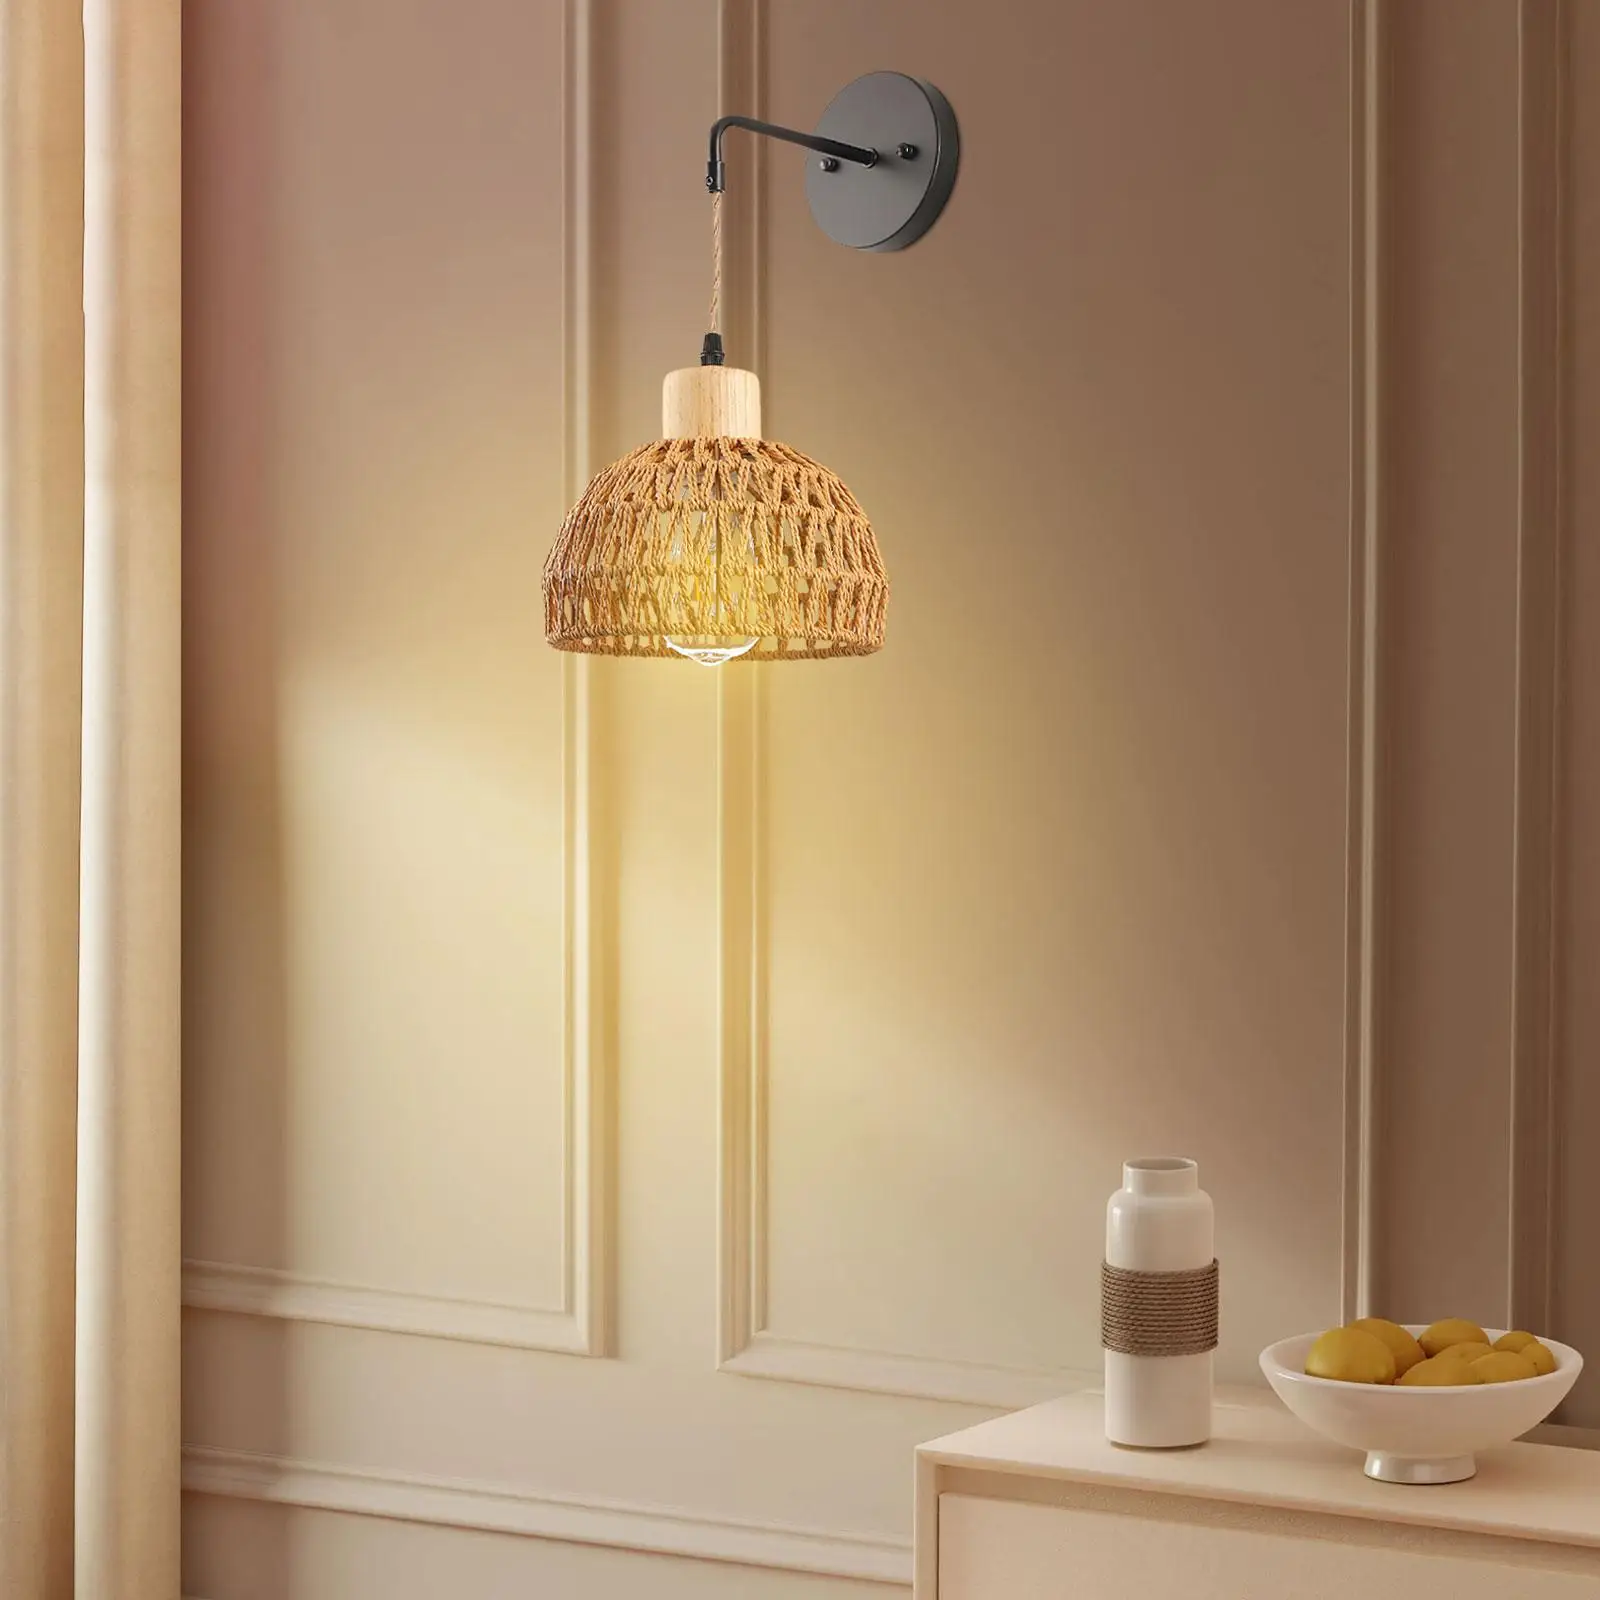 Hand Woven Wall Light Handmade Shade E26/E27 Base Rustic Wall Sconce Bedside Lamp for Entry Hallway Bedroom Kitchen Decoration